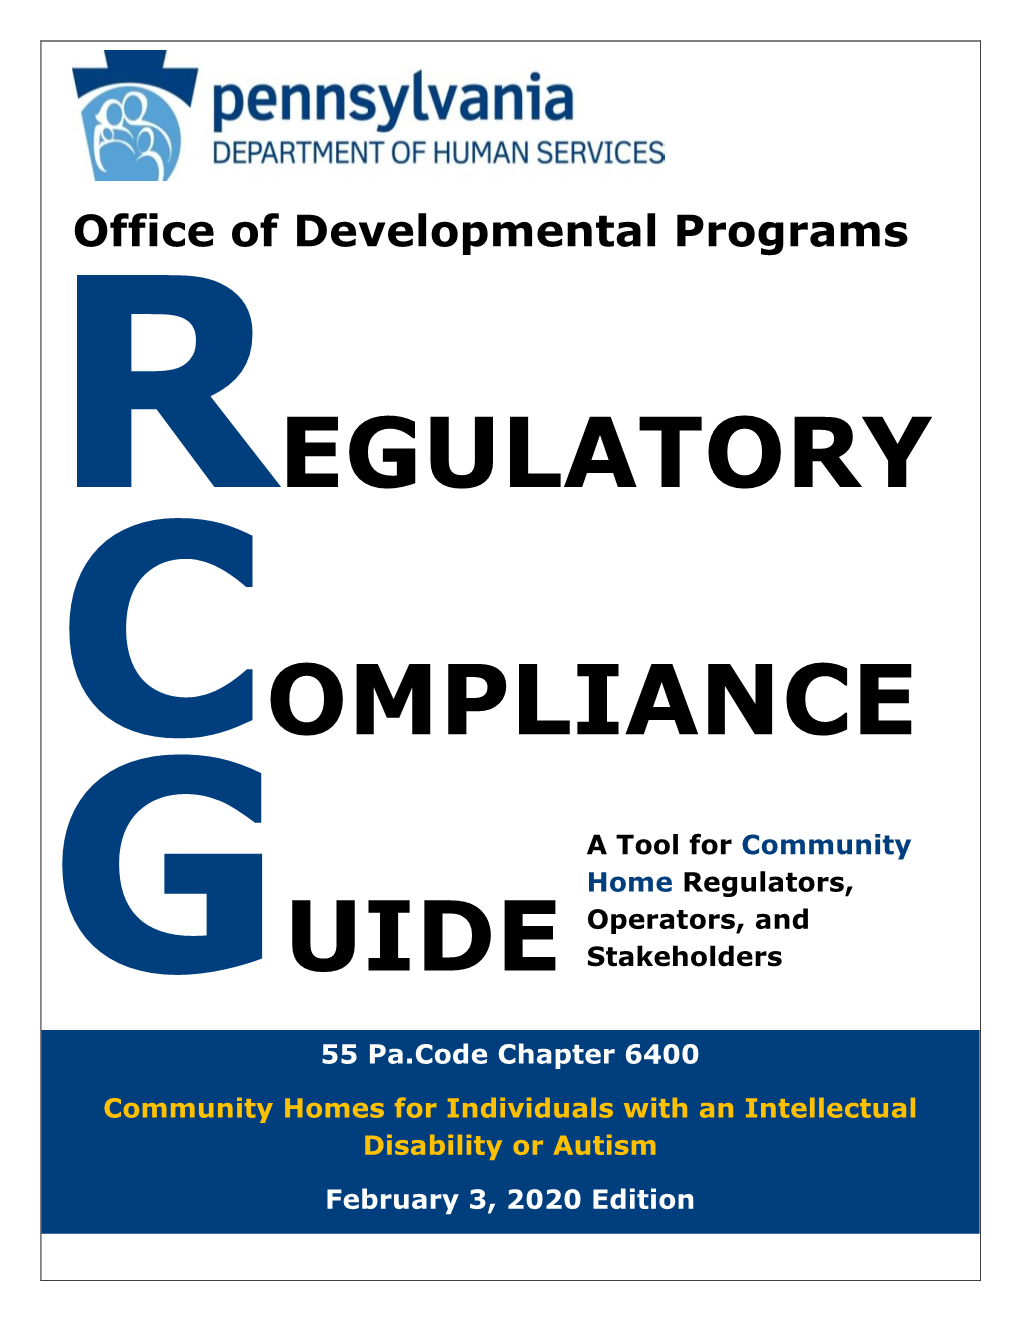 Regulatory Compliance Guide, Or RCG, Is a Companion Piece to the Chapter 6400 Regulations; It Should Be Used Along with the Regulations, Not Instead of Them